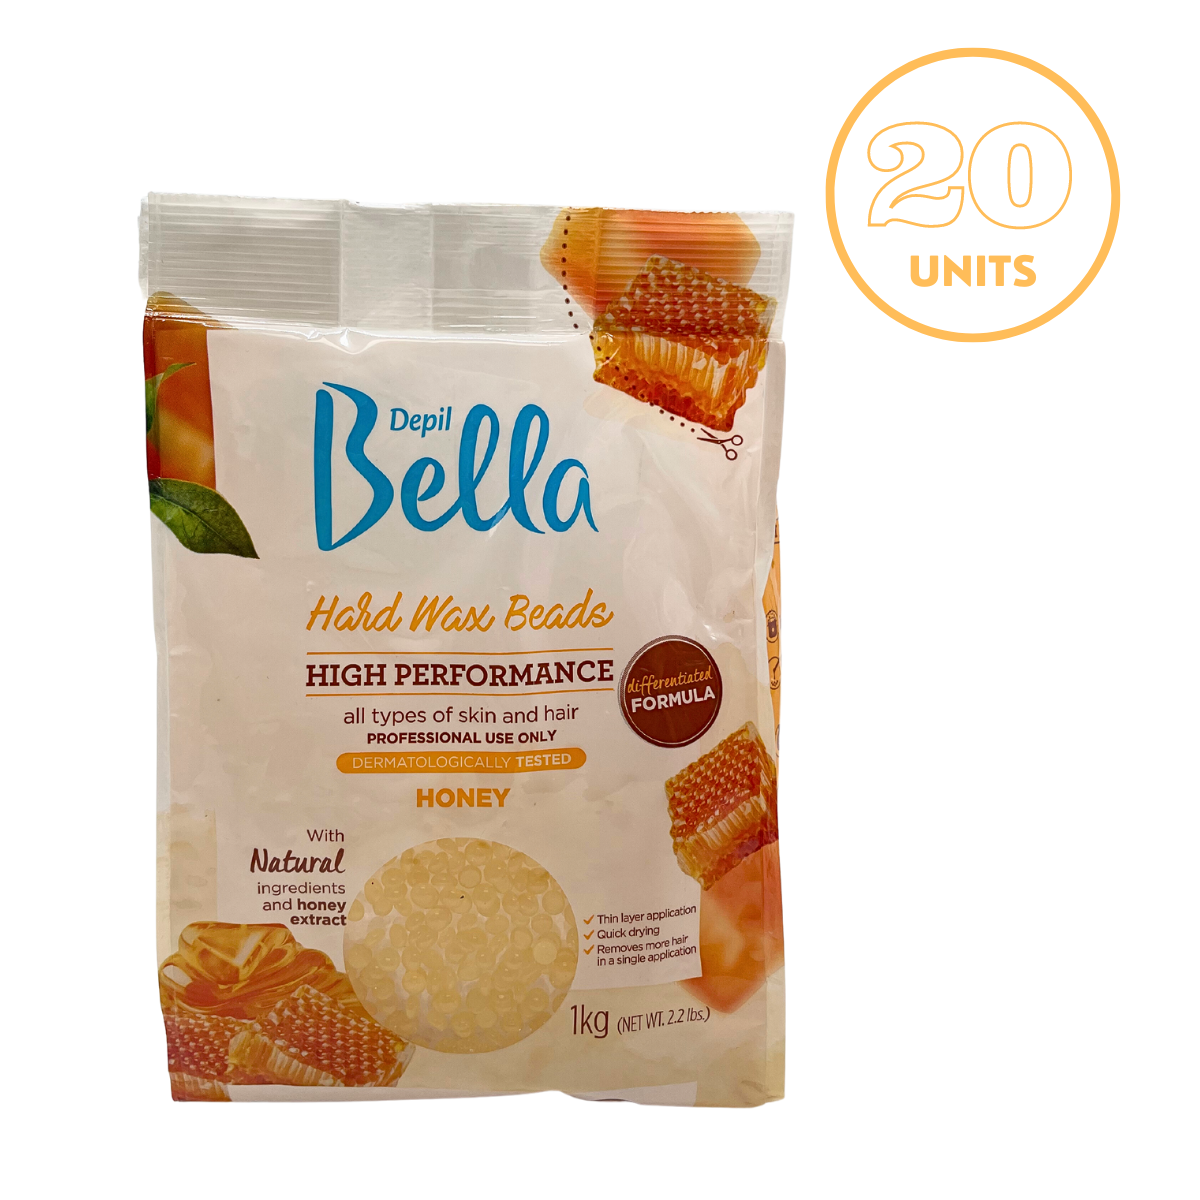 Depil Bella Hard Wax Beads Honey - Professional Hair Removal, 2.2 lbs (20 Units Offer)